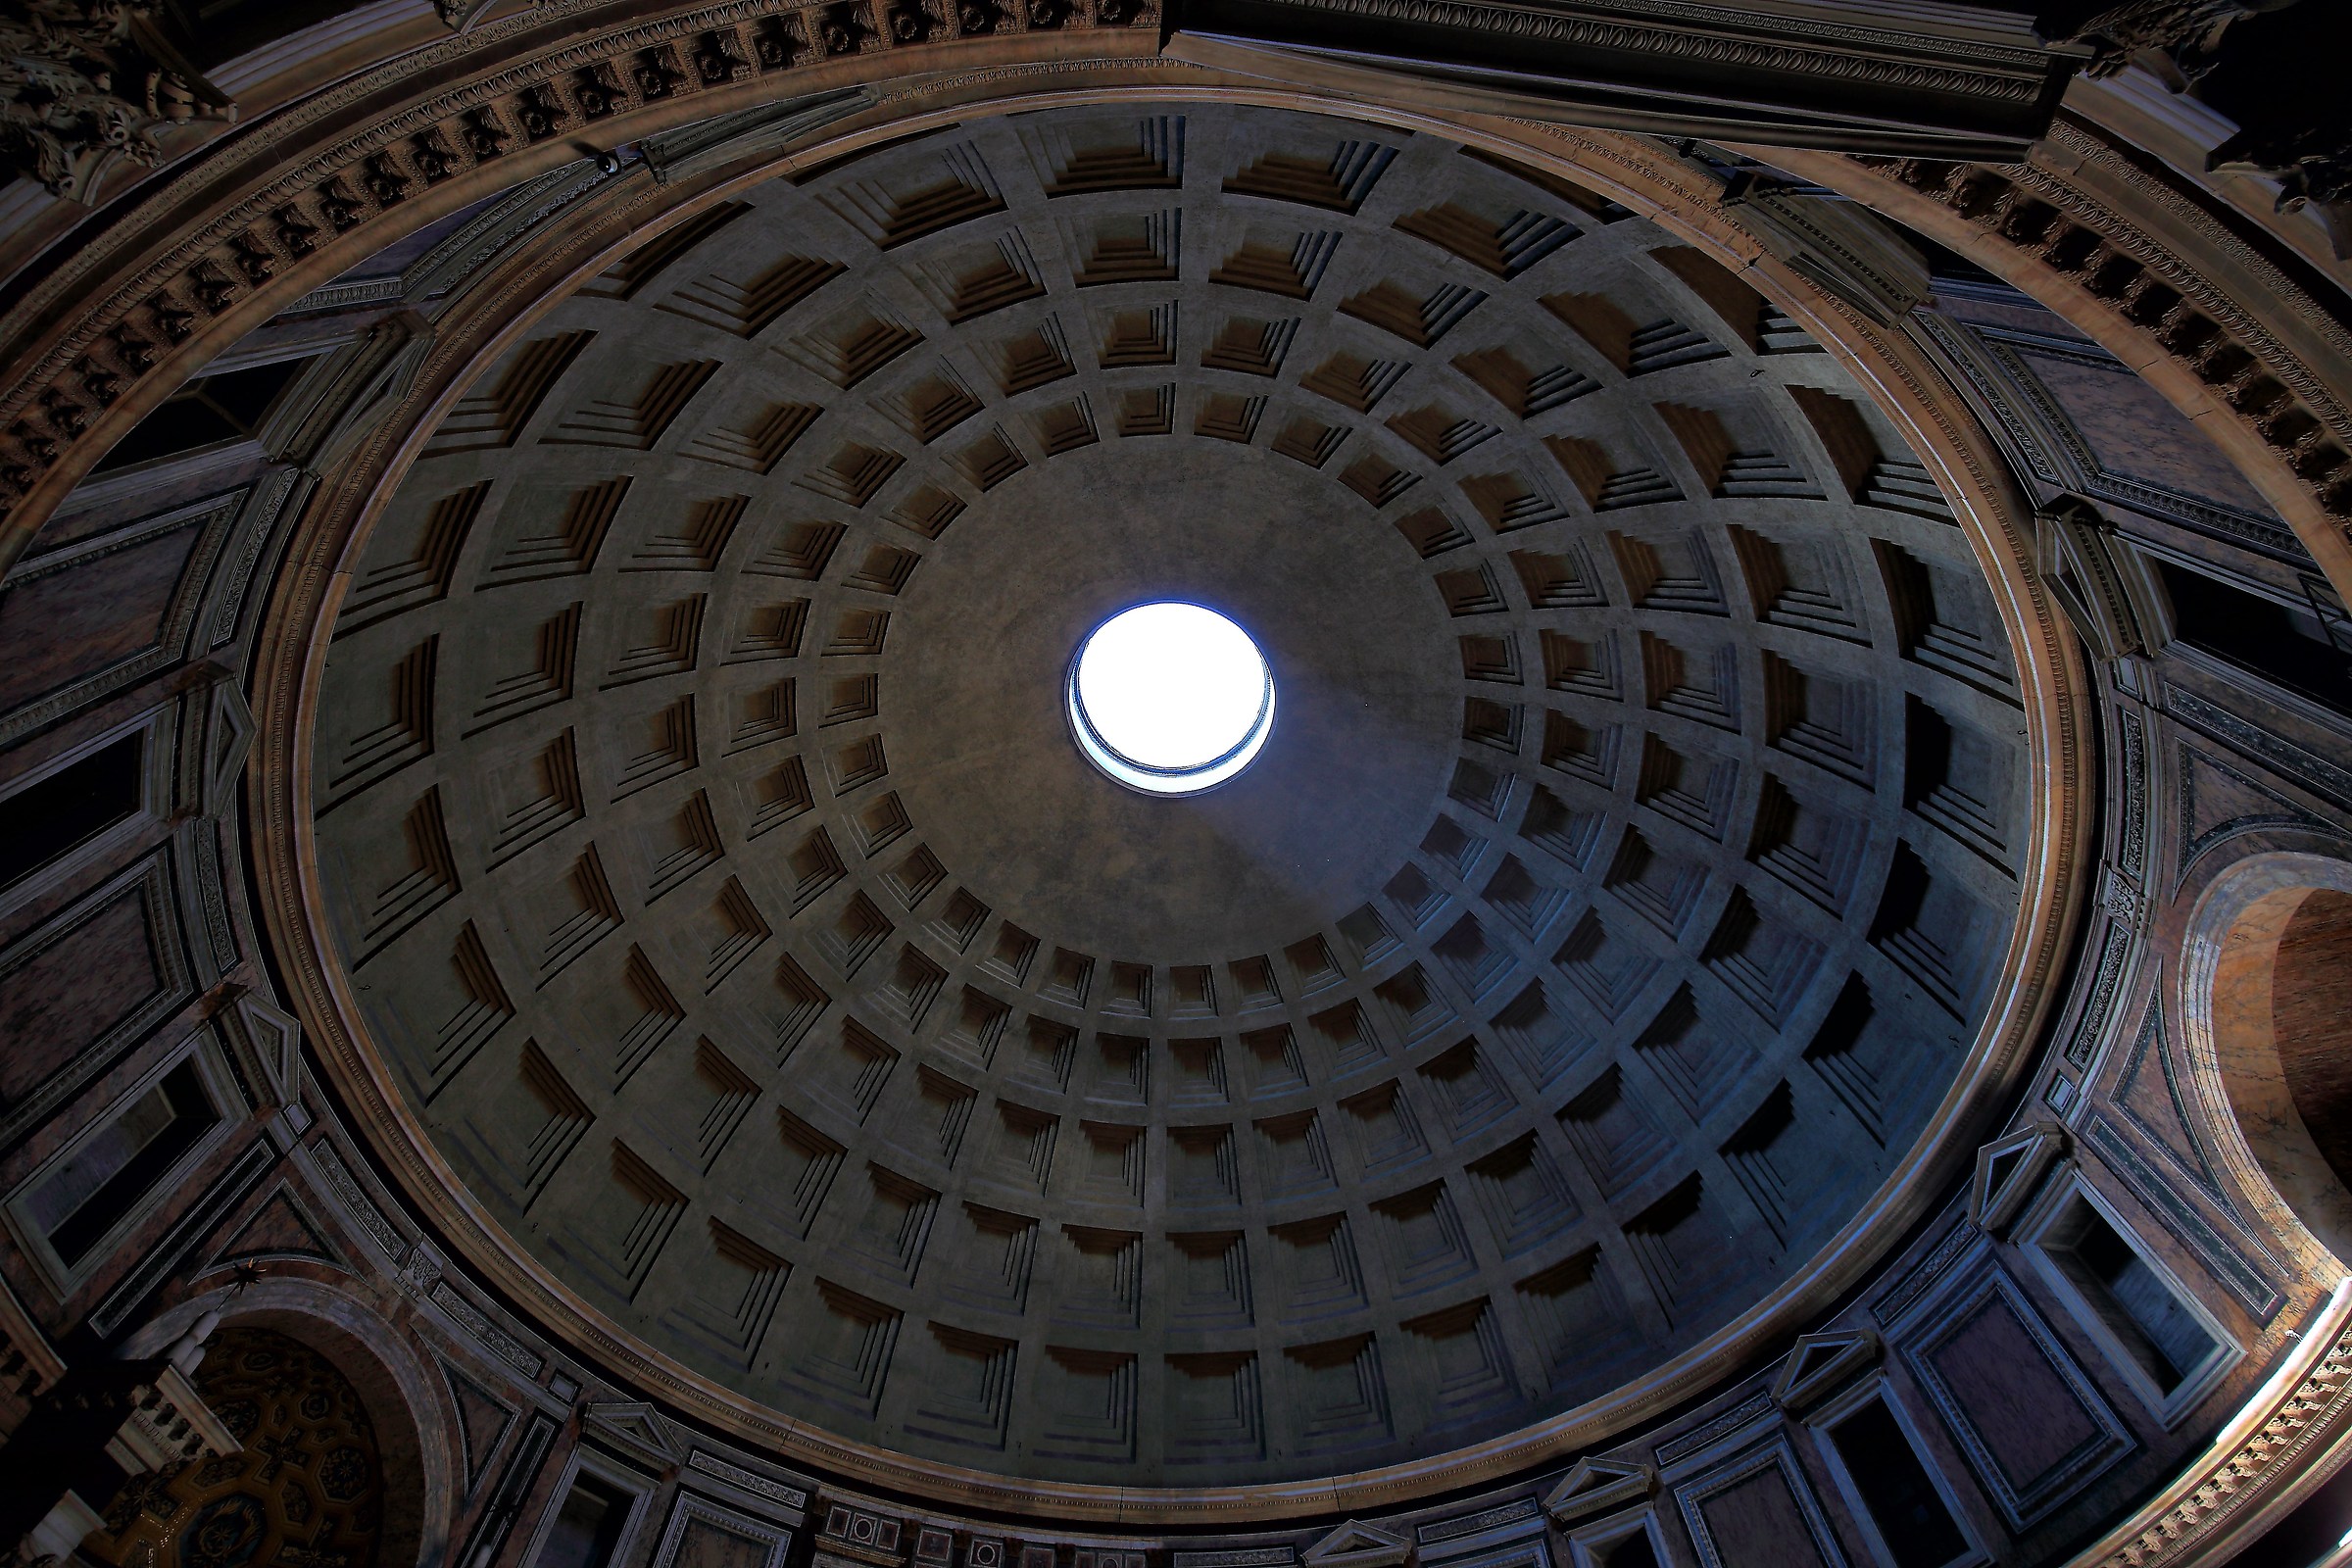 The Pantheon Dome...